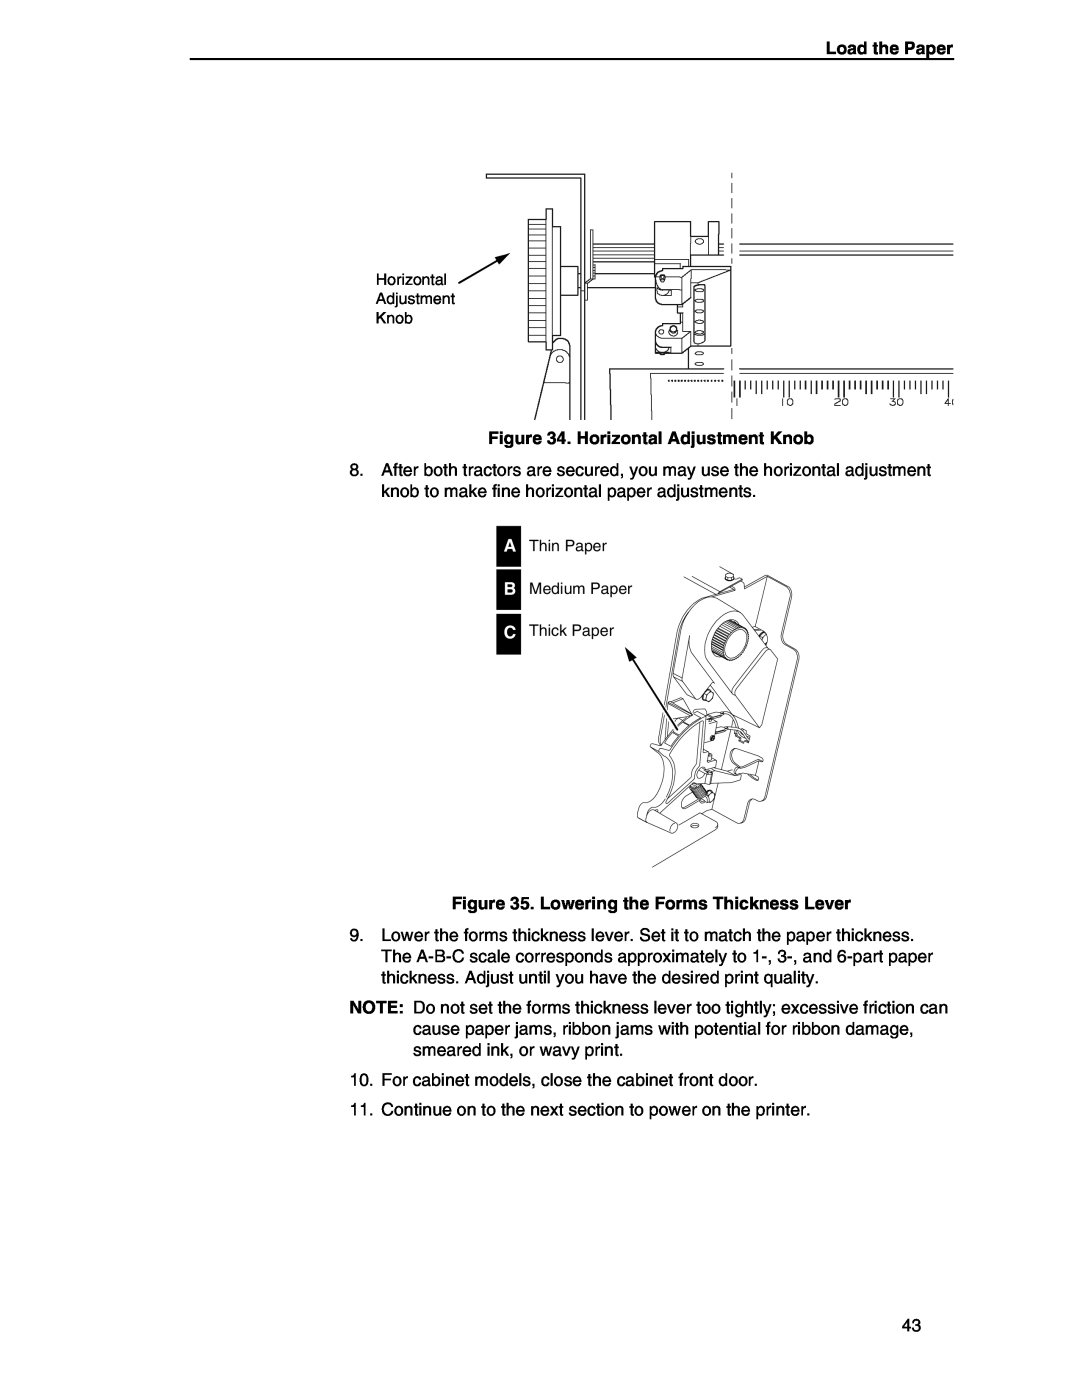 Compaq P5000 Series setup guide Horizontal Adjustment Knob, A B C, Lowering the Forms Thickness Lever, Load the Paper 